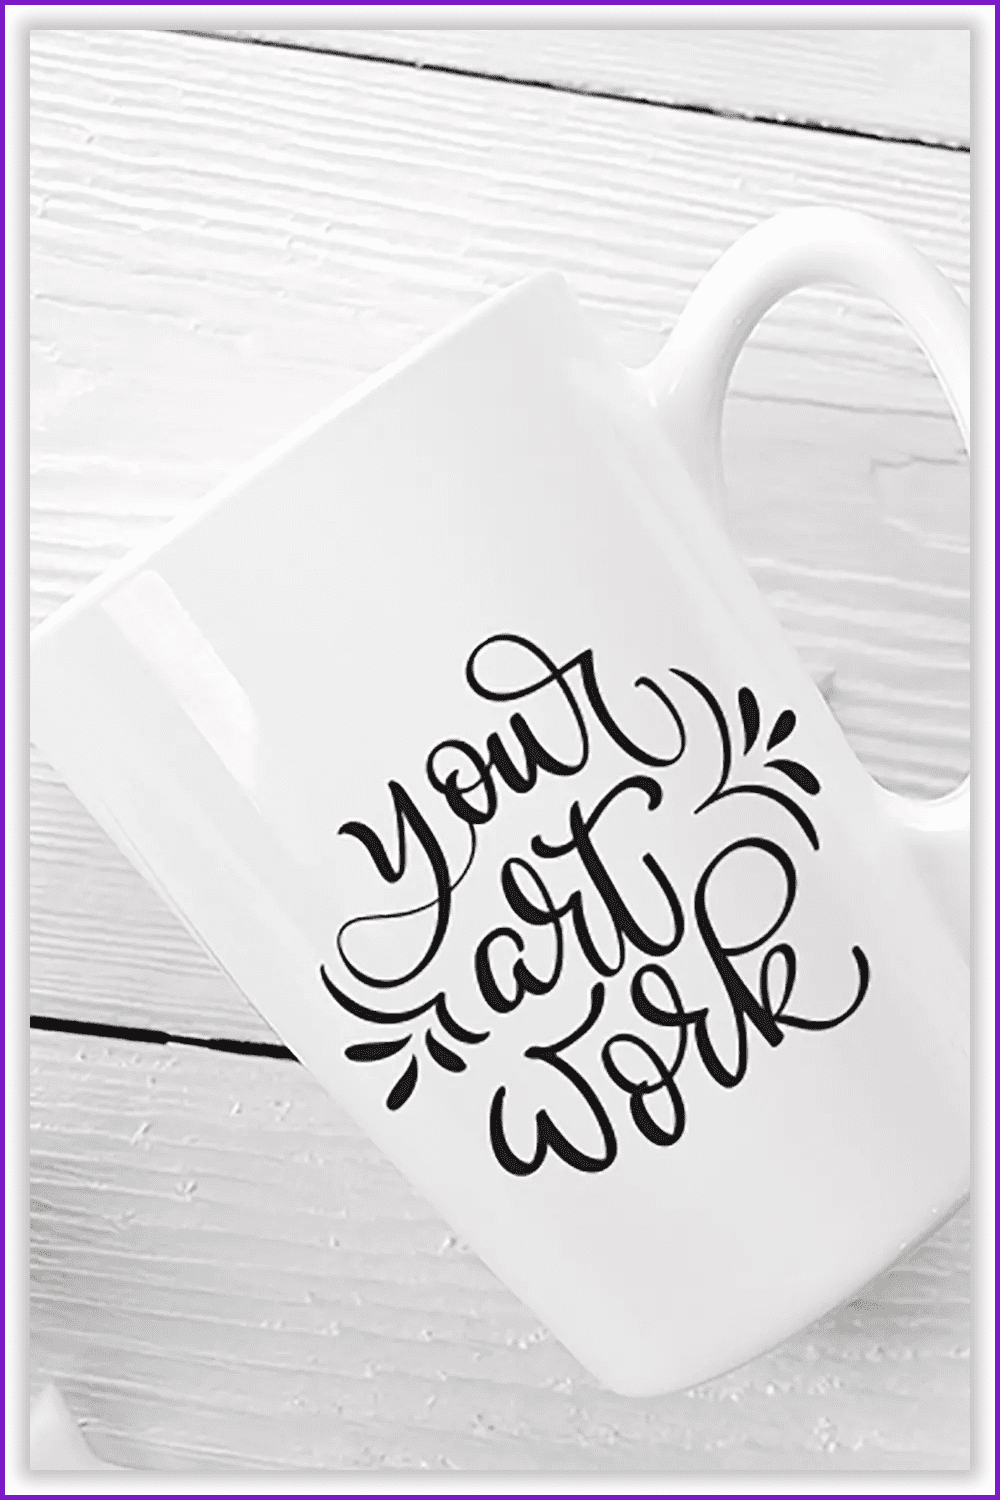 Photo of a white mug with black text on a white table.